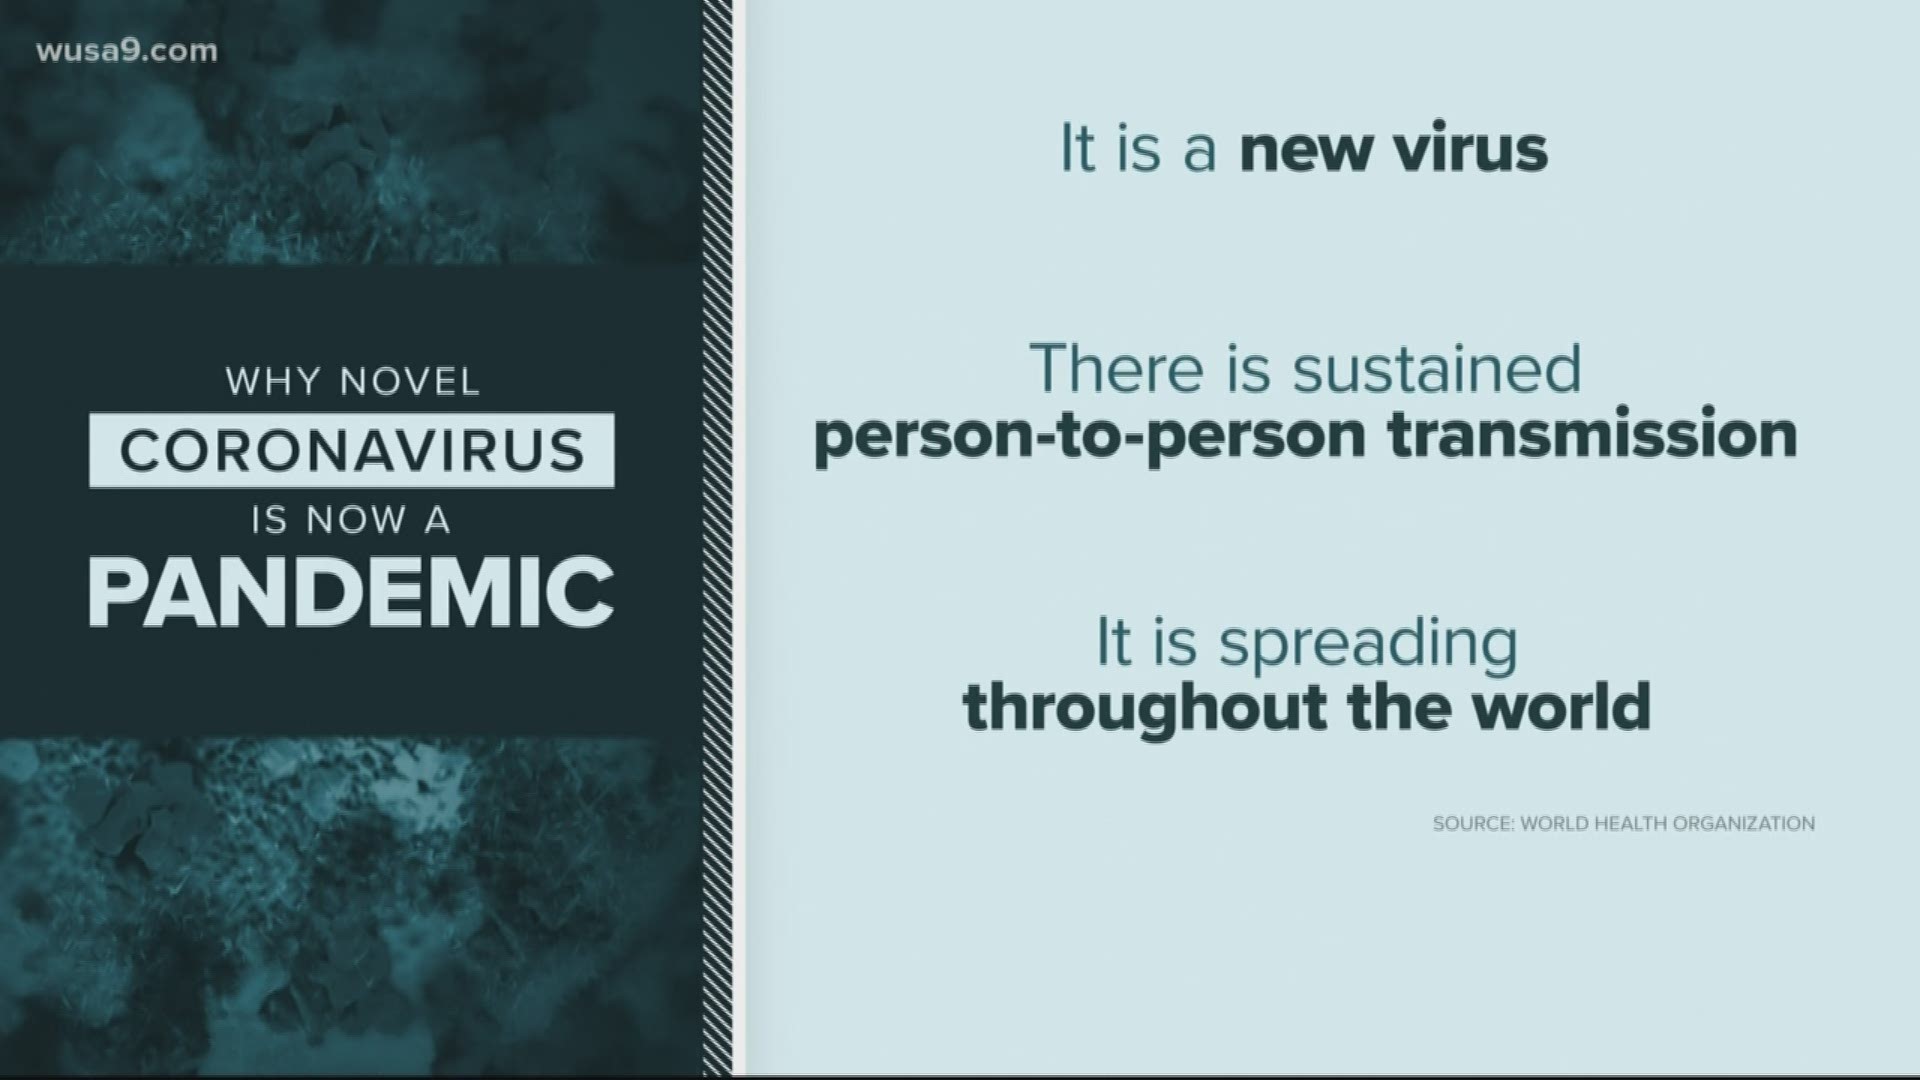 Today, the World Health Organization declared CO-VID-19 a PANDEMIC. So what is that? And what does it mean?